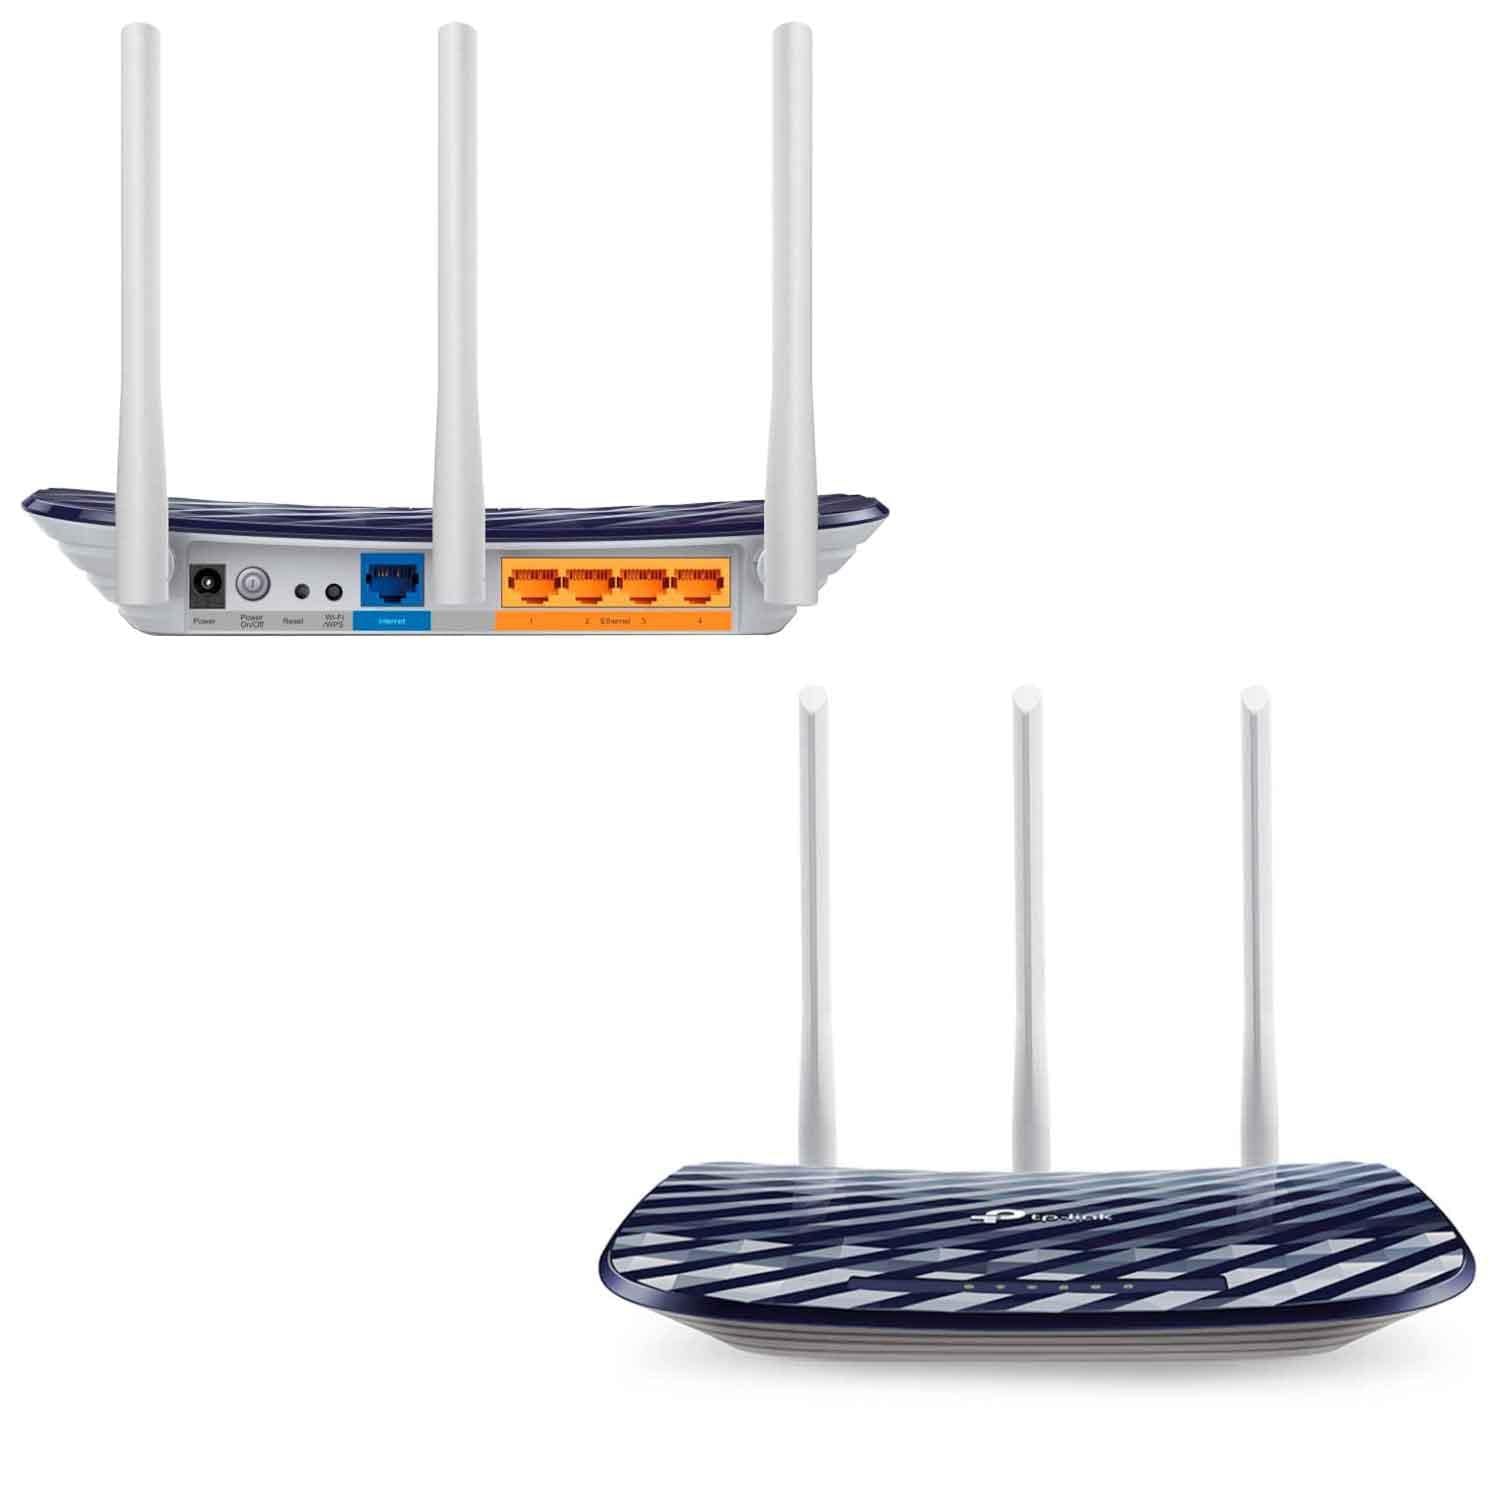 Buy TP-Link AC750 Dual Band Wireless Cable Router, 4 10/100 LAN + 10/100  WAN Ports, Support Guest Network and Parental Control, 750Mbps Speed Wi-Fi,  3 Antennas (Archer C20) at Best Price on Reliance Digital